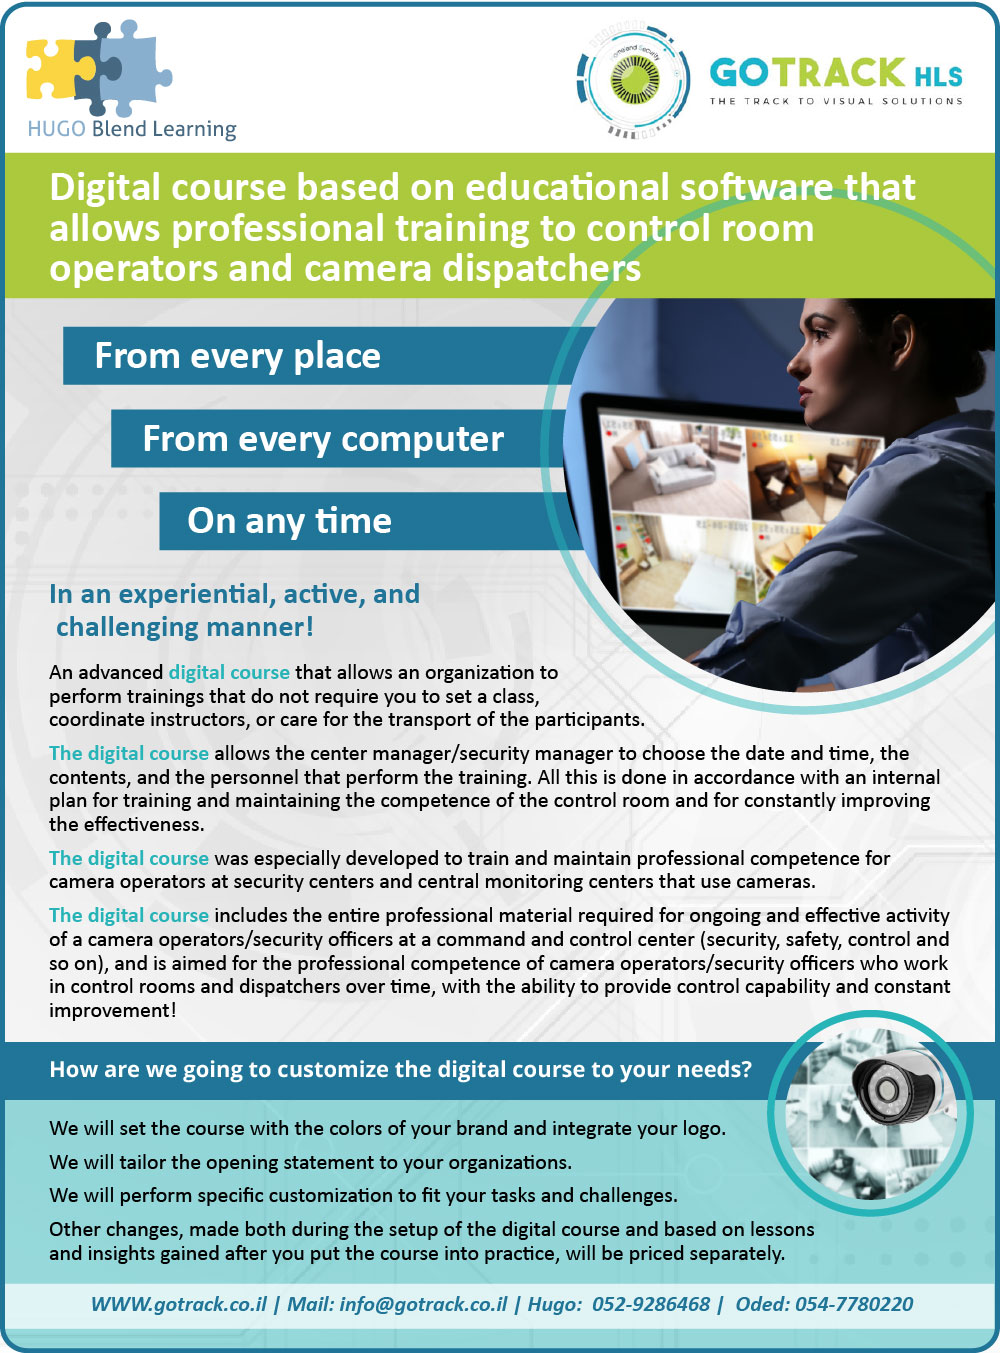 Digital Course - The monitoring center